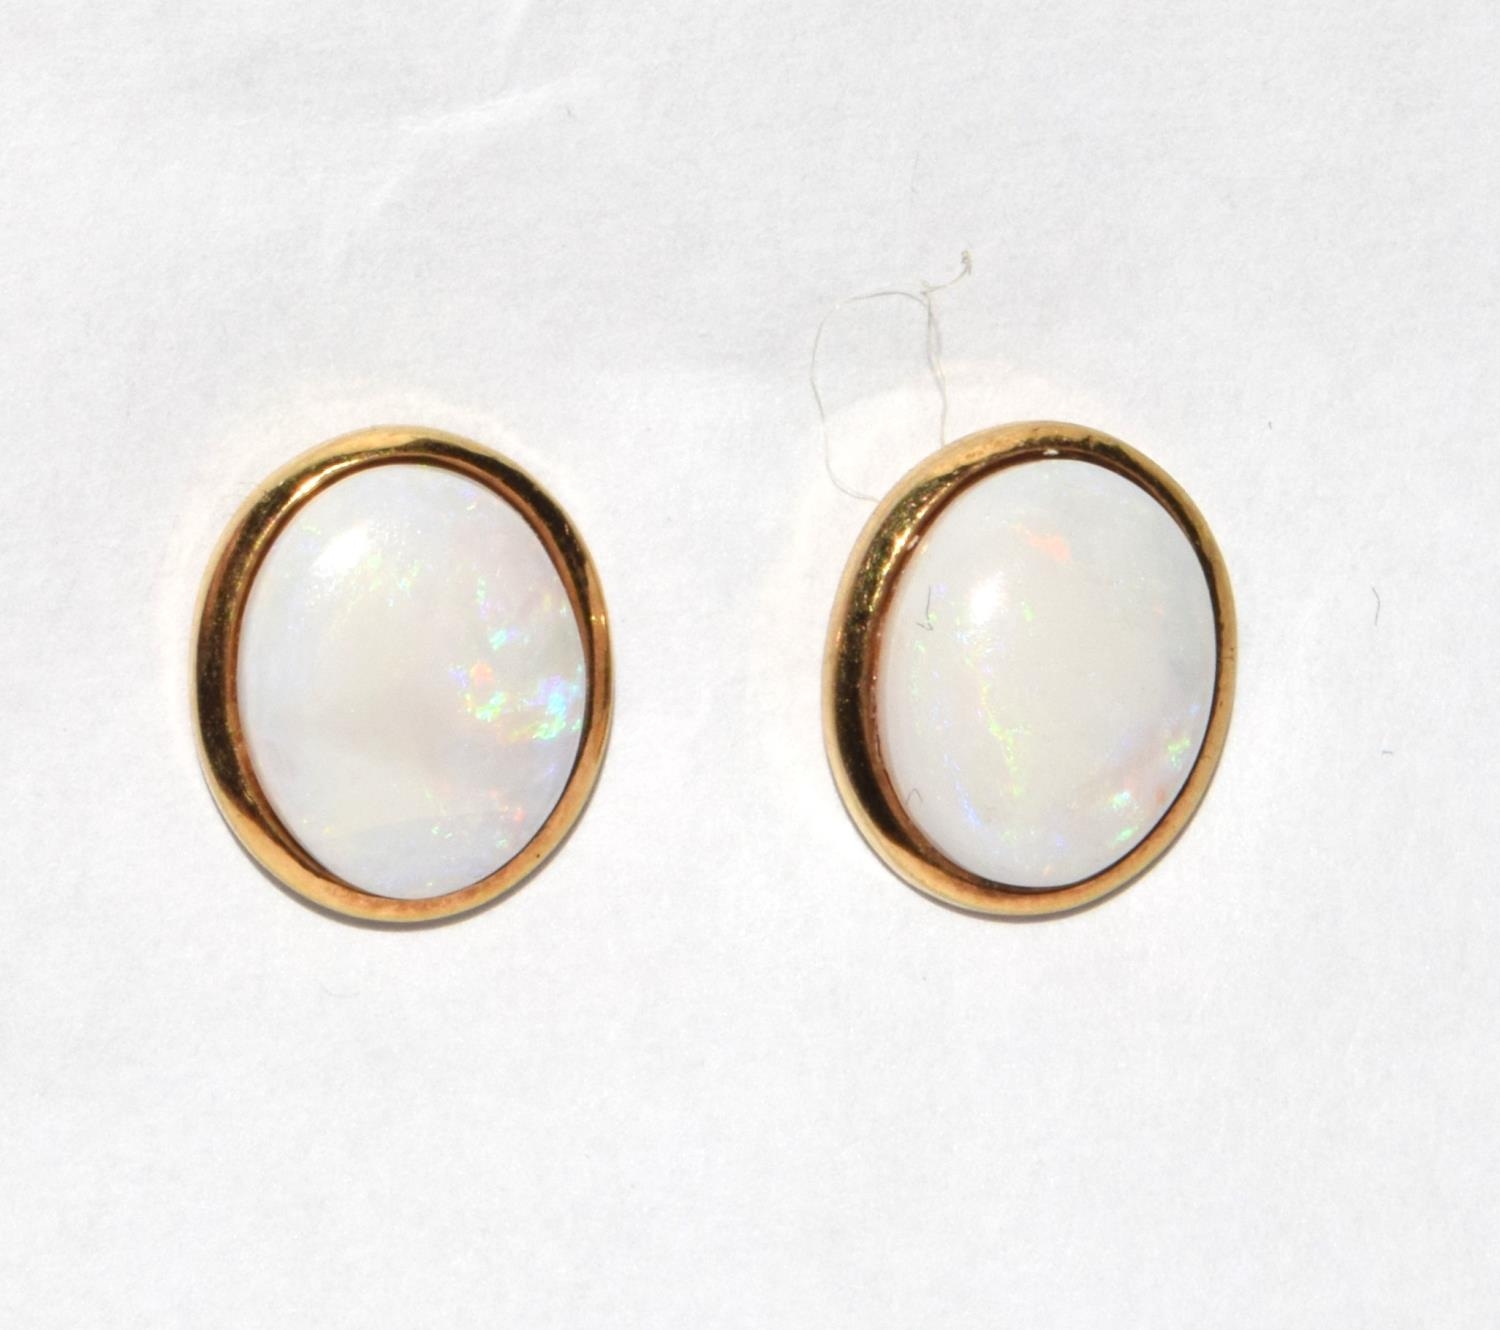 9ct gold Opal ear studs - Image 2 of 4